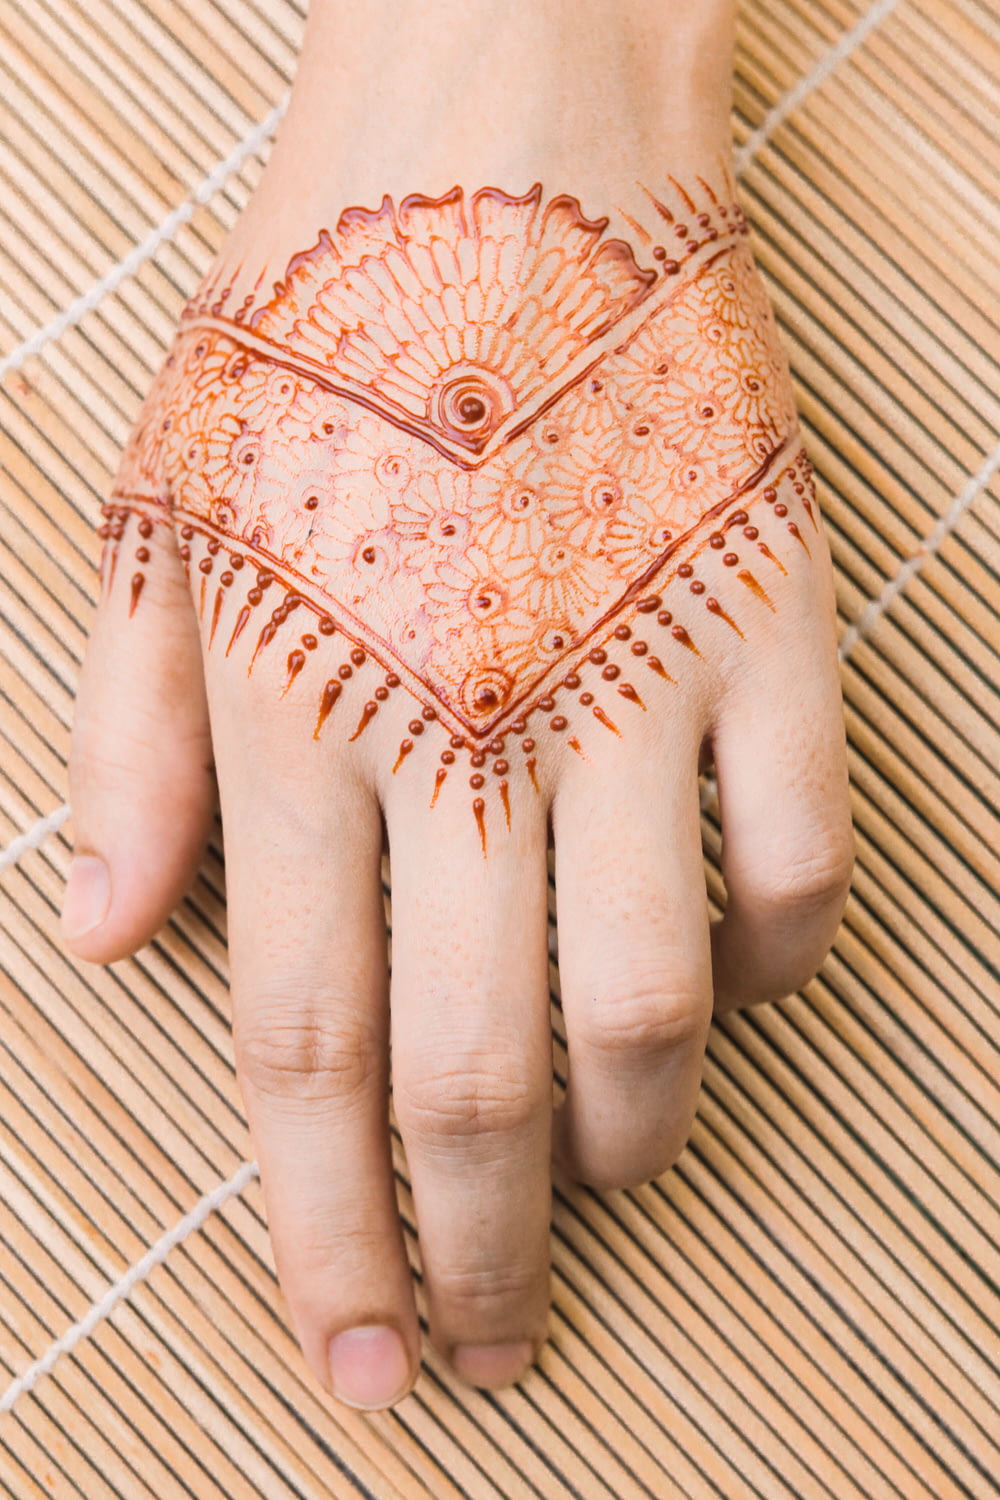 a woman's hand with a hendi on it